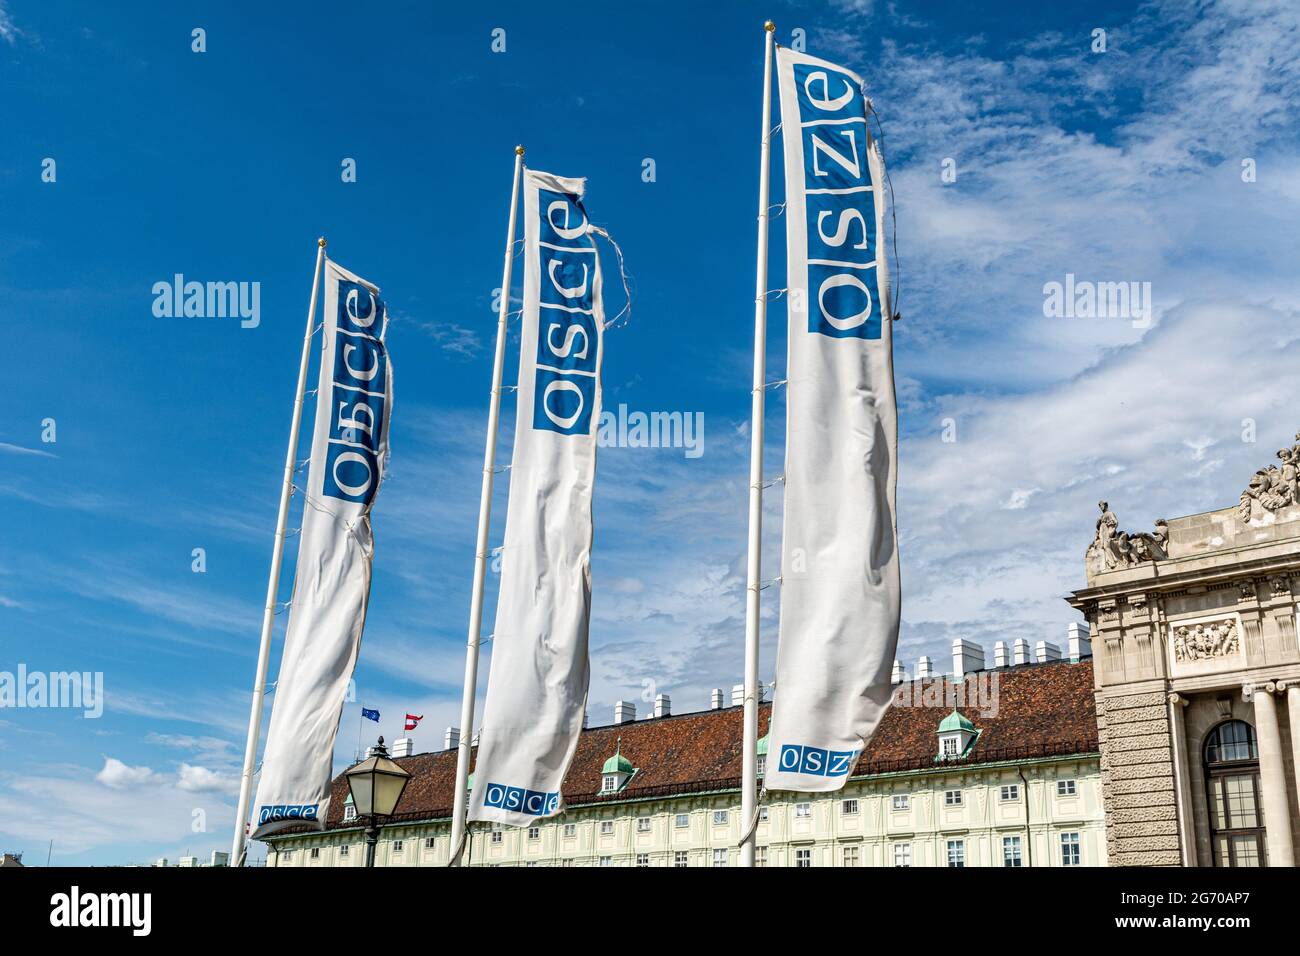 Flags of the OSCE (Organization for Security and Co-operation in Europe) against a blue sky in Vienna, Austria Stock Photo